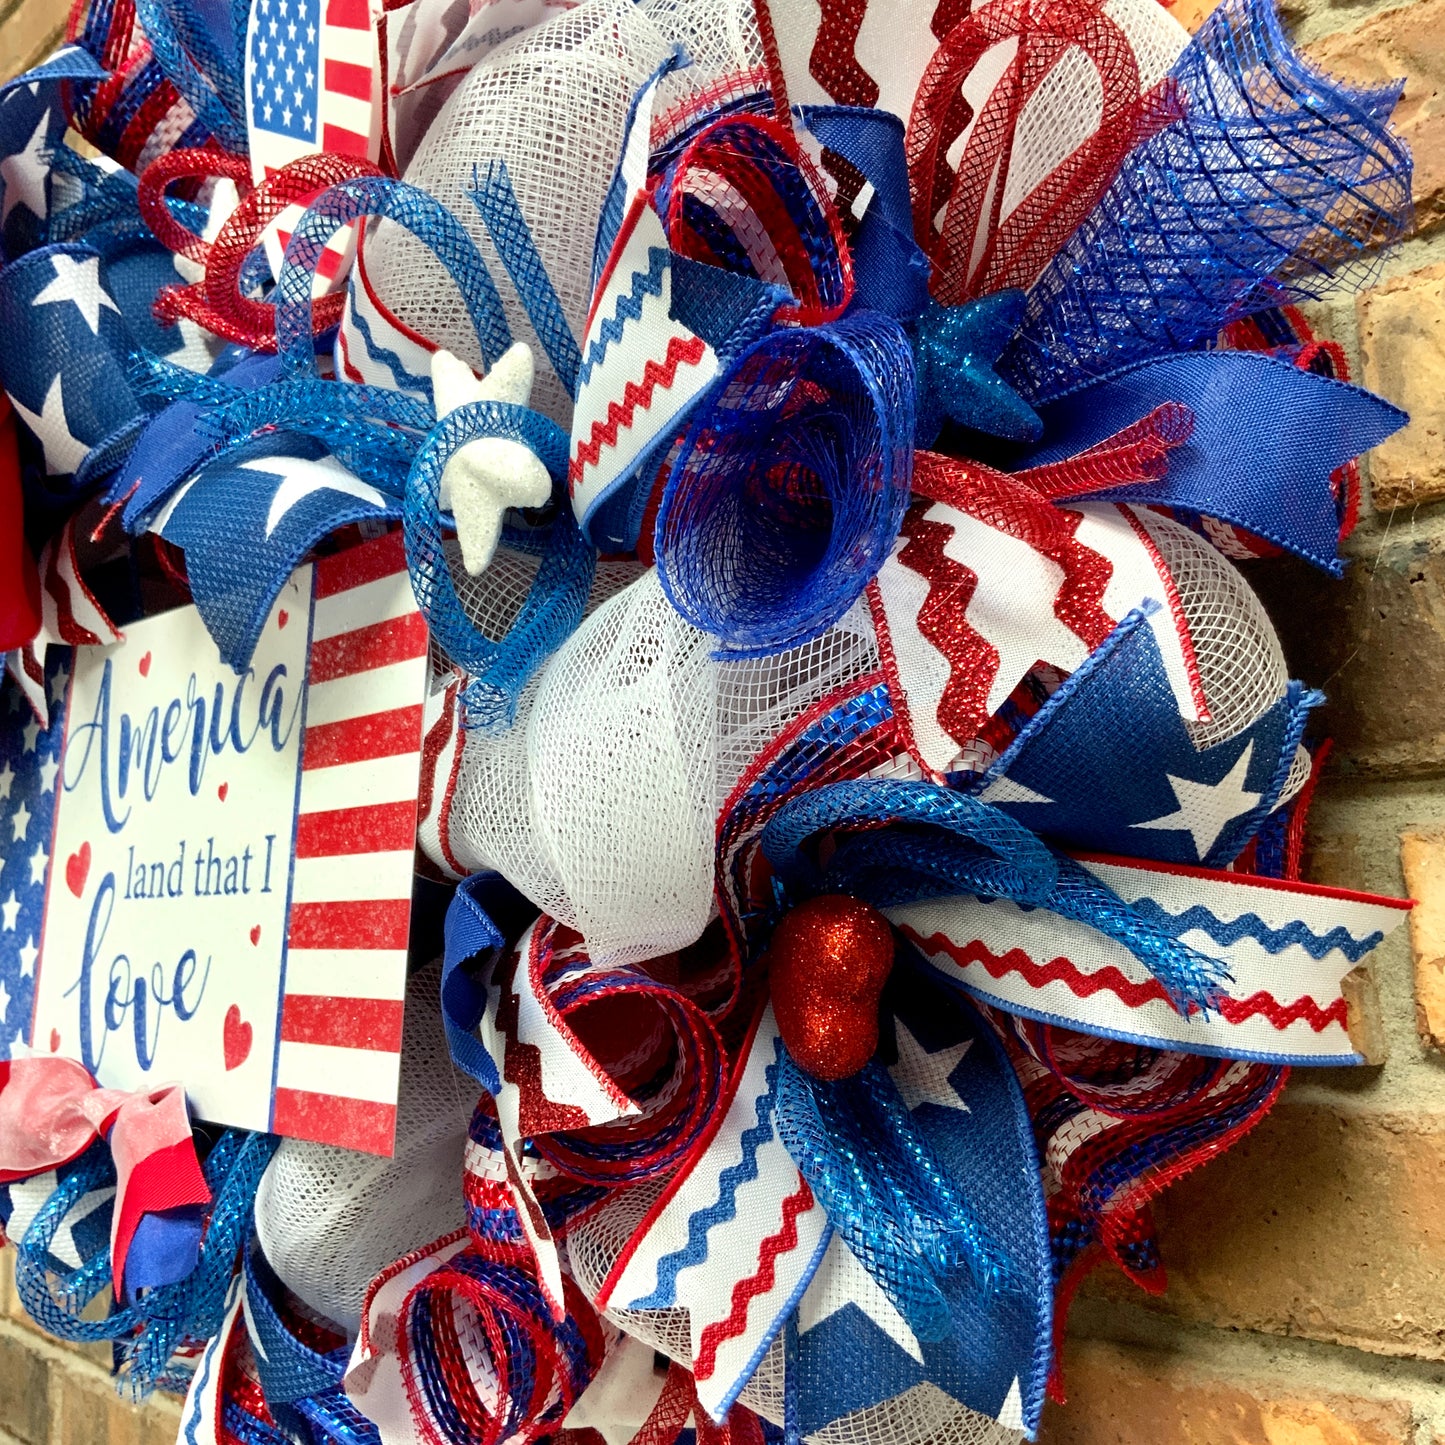 America Land That I Love, Patriotic Wreath For Front Door, Fourth Of July Wreath, American Wreath, Patriotic Decor, Memorial Day Wreath